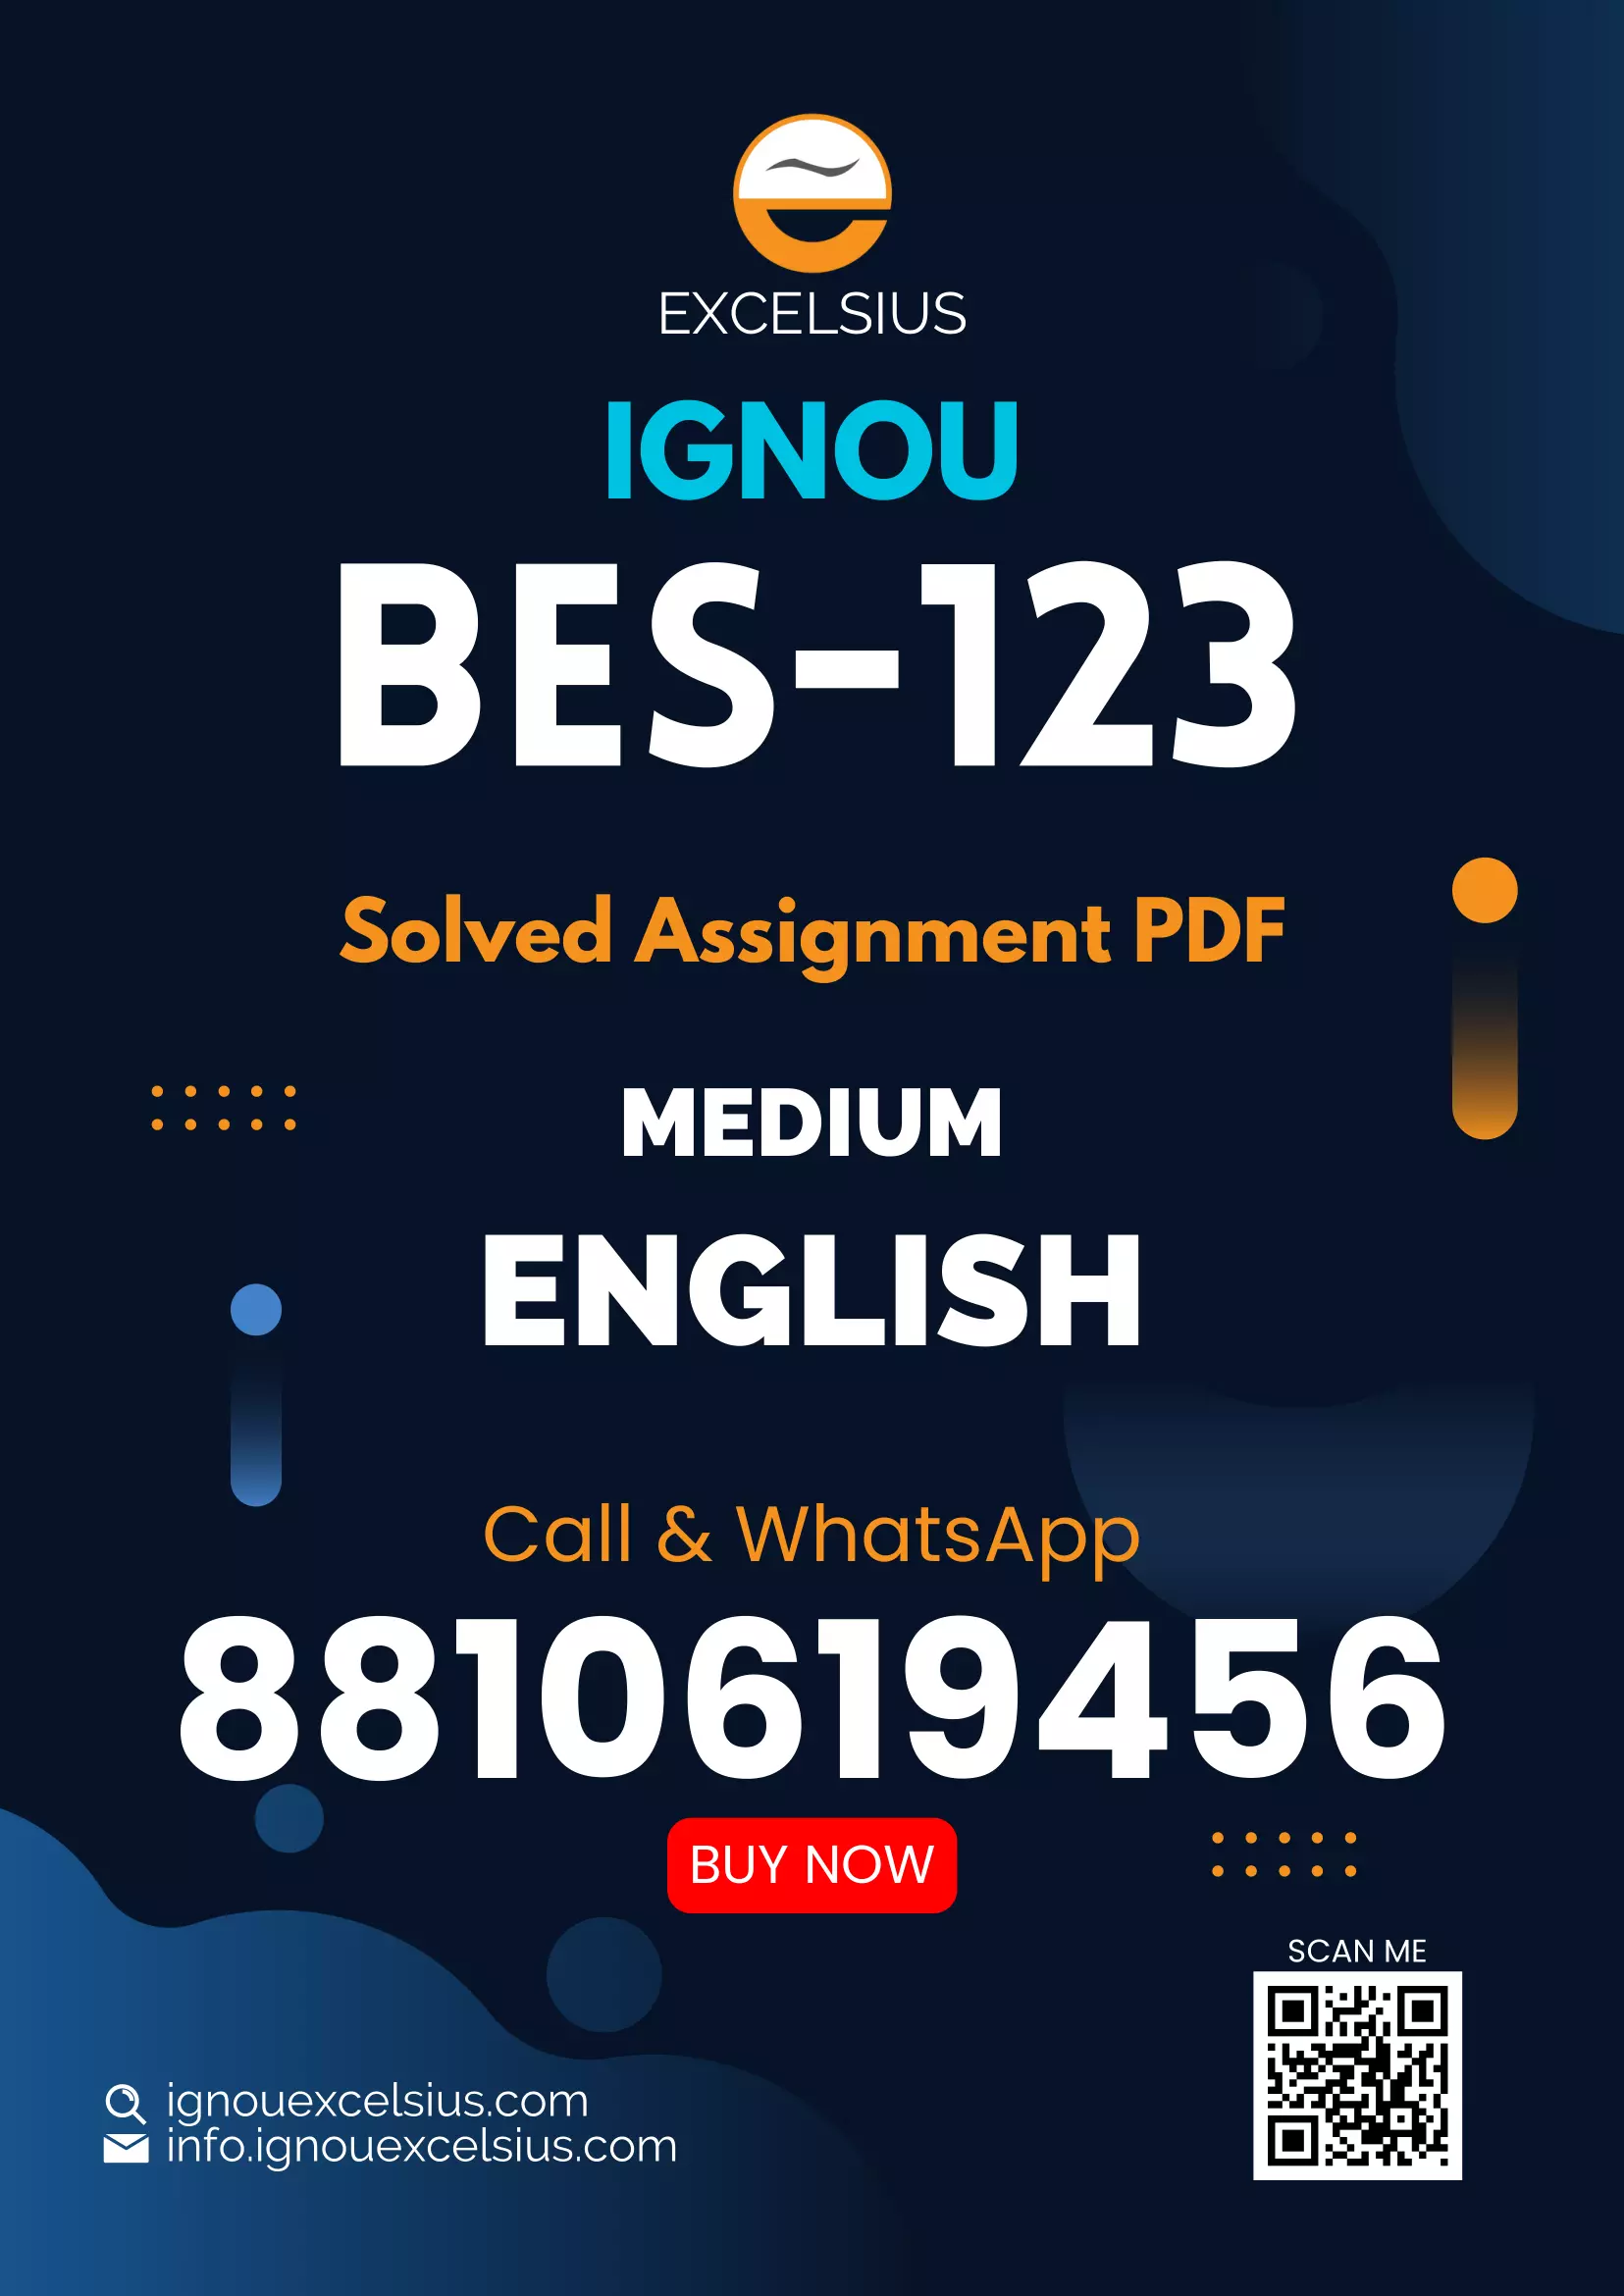 IGNOU BES-123 - Learning and Teaching, Latest Solved Assignment-January 2021 - July 2021